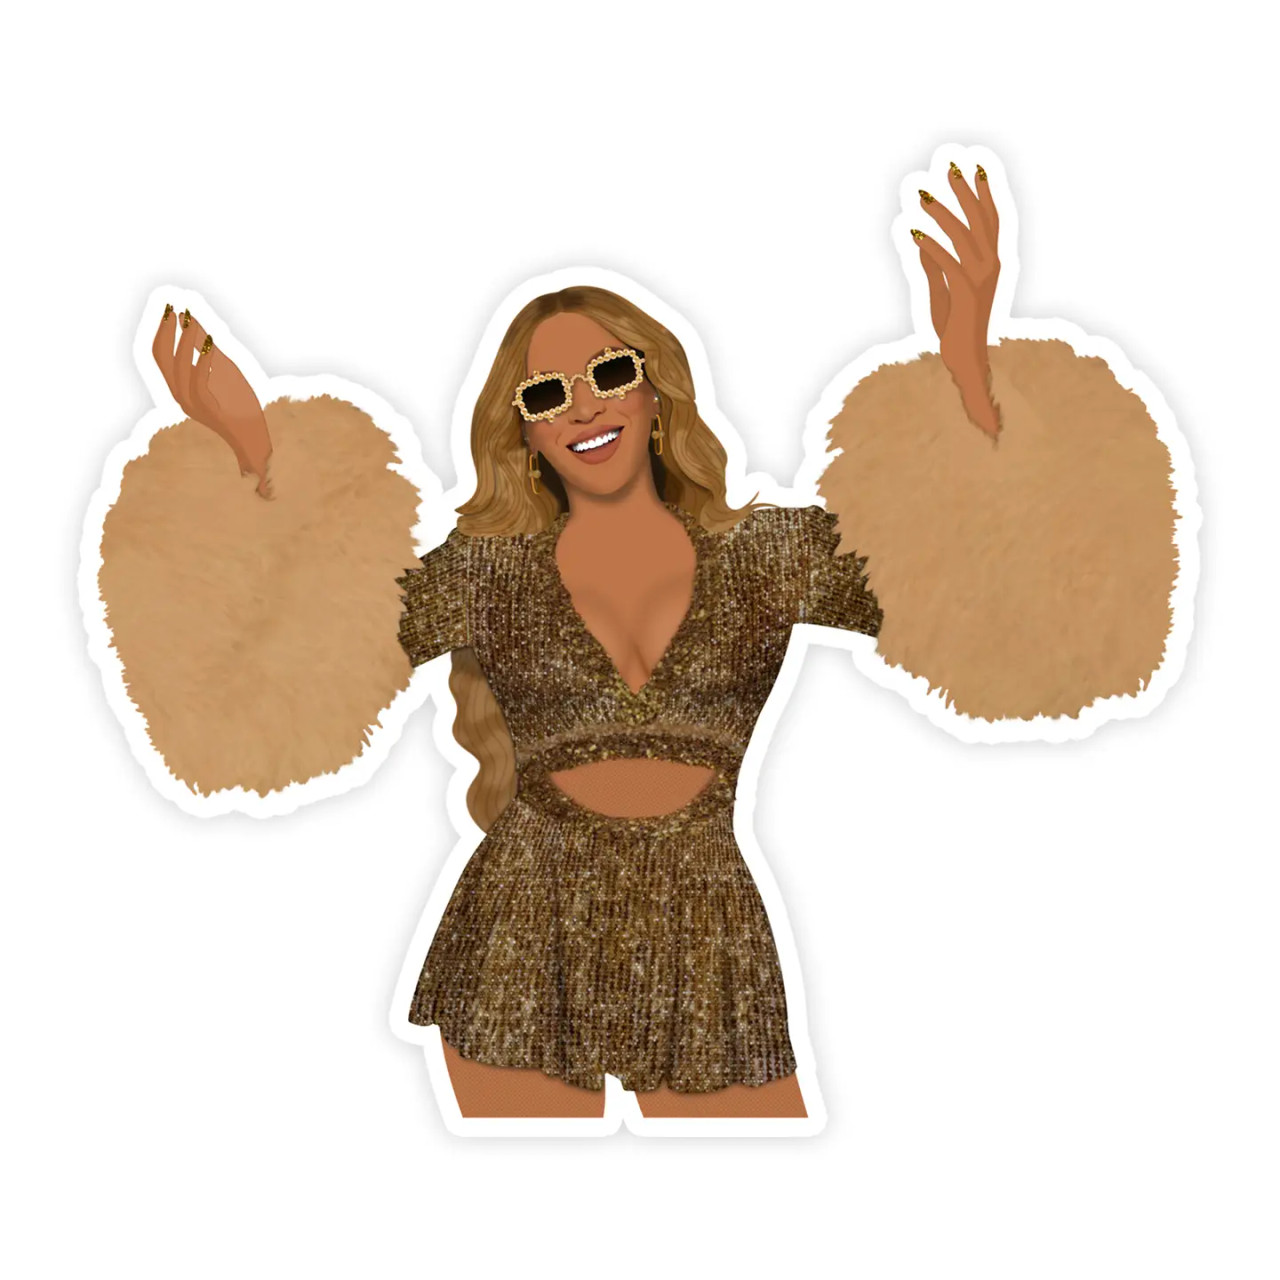 Beyonce Stickers for Sale  Beyonce stickers, Beyonce, Tumblr stickers